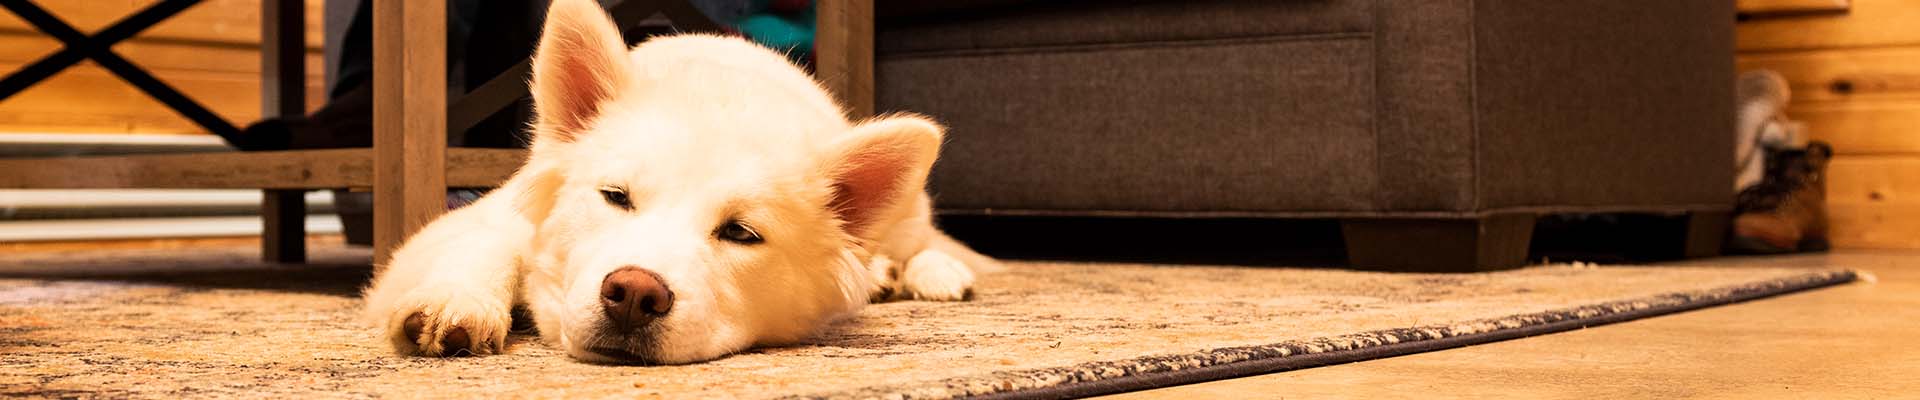 A white and fluffy dog falls asleep on the rug beside his family on the couch.